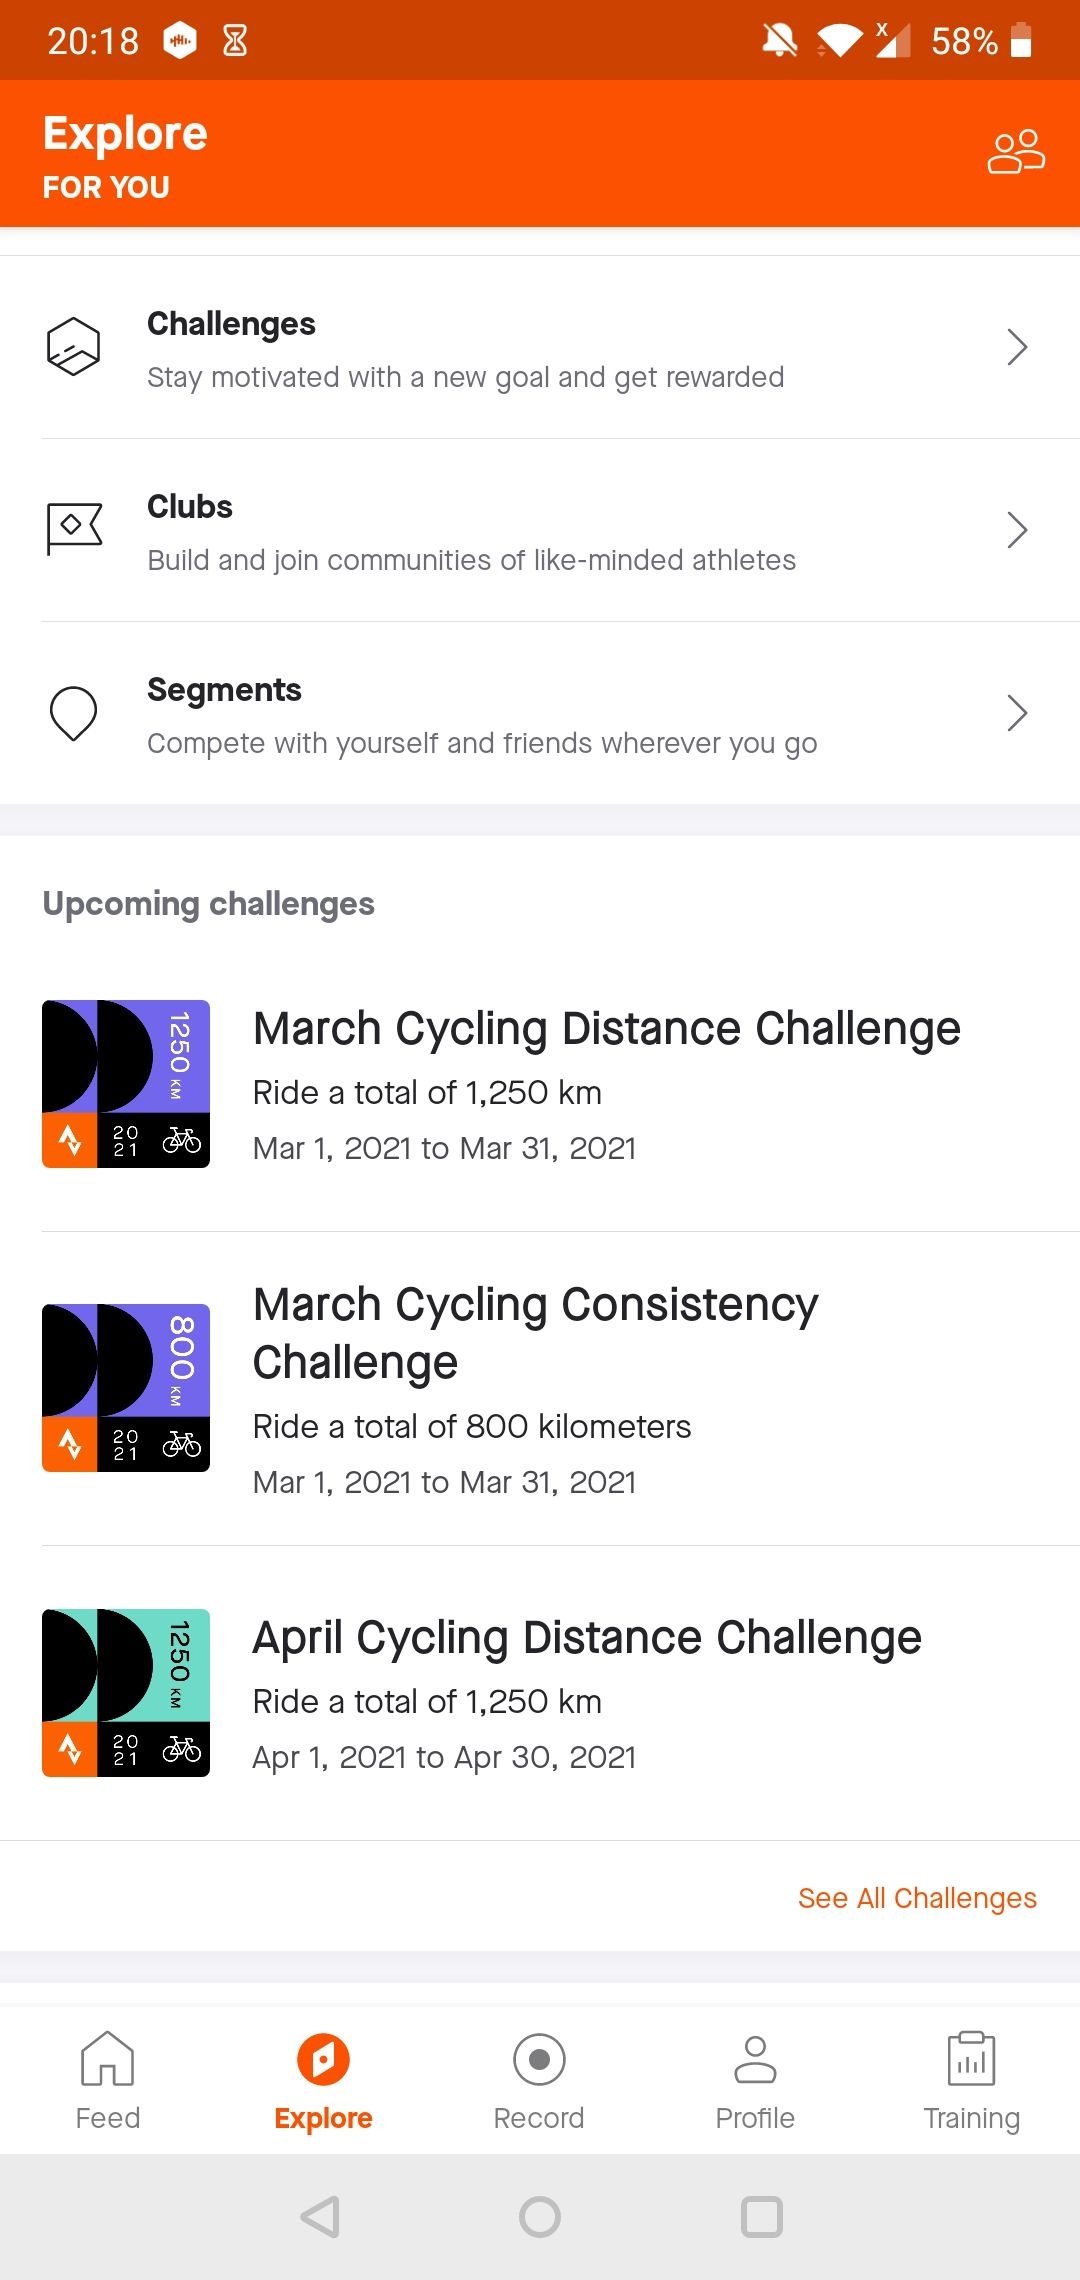 The "Explore" tab on the Strava Android app on the "For You" section.